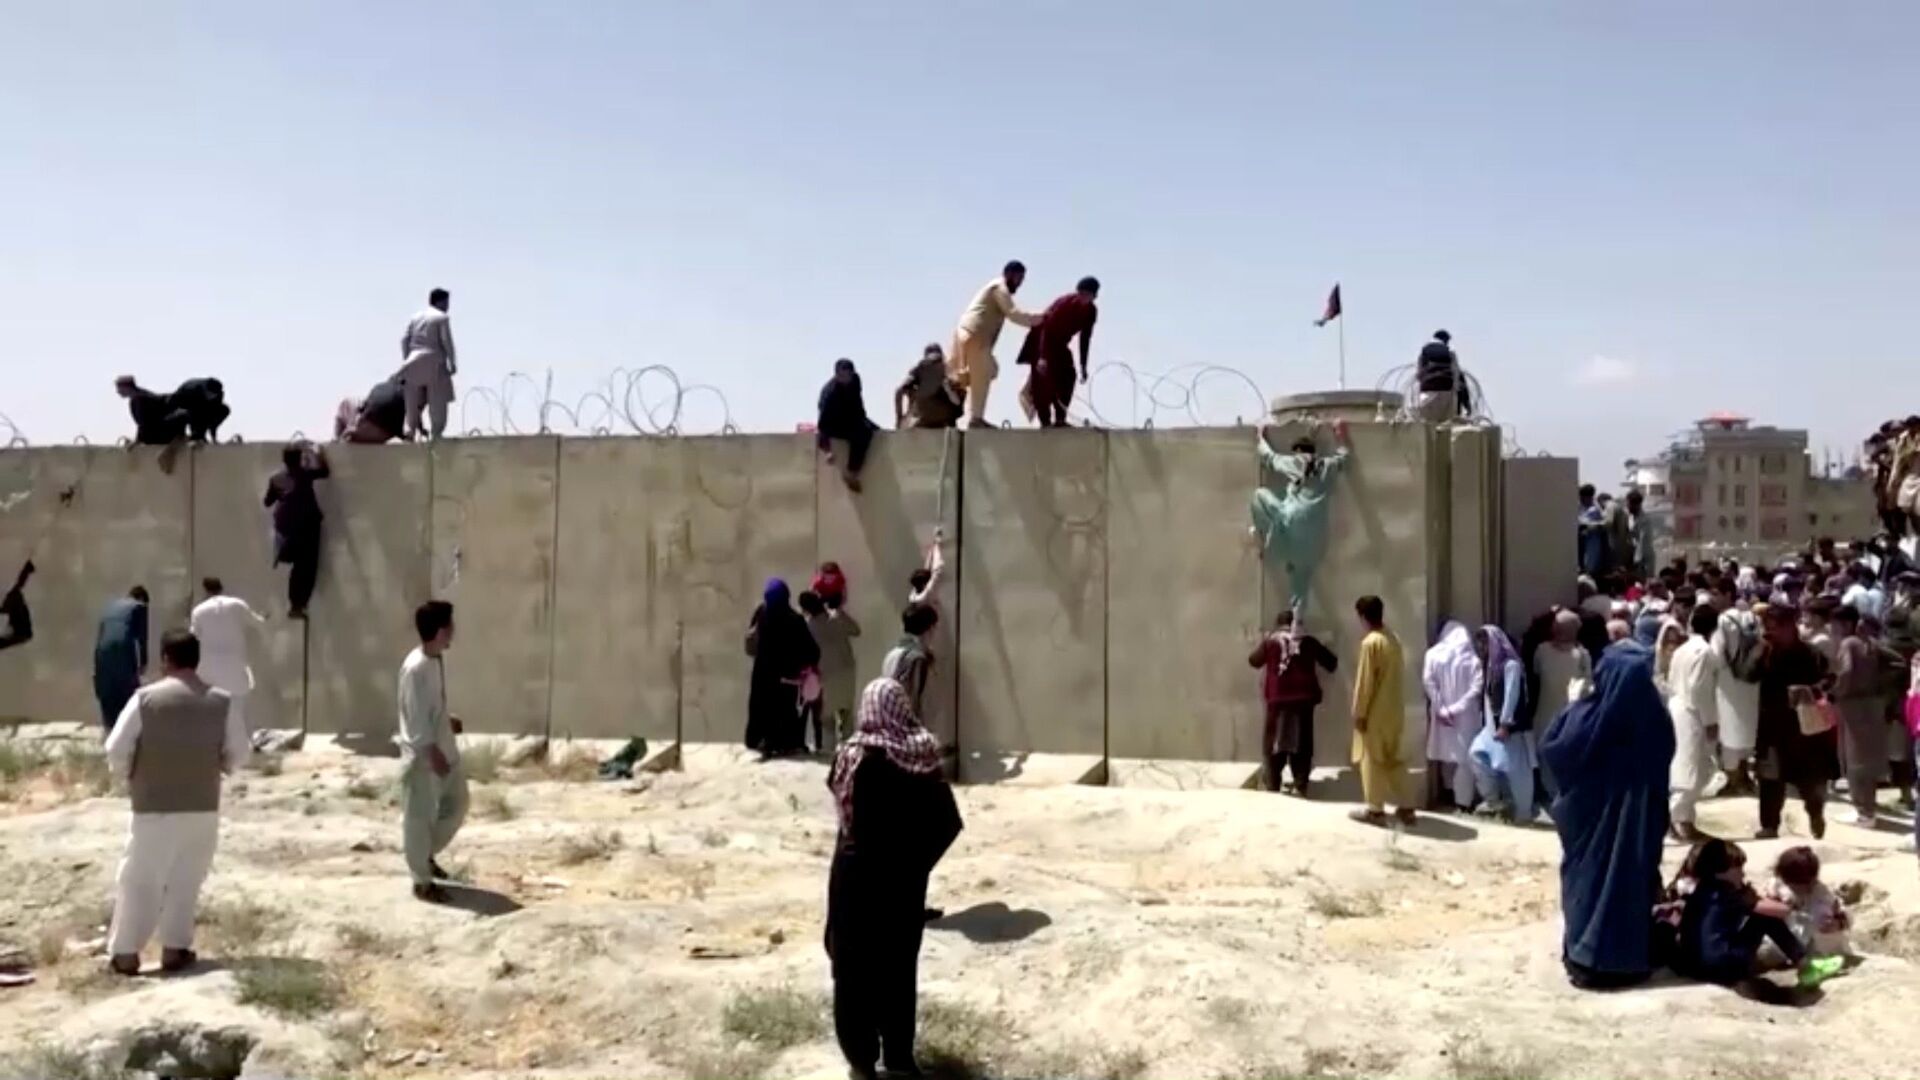 People climb a barbed wire wall to enter the airport in Kabul, Afghanistan August 16, 2021, in this still image taken from a video. - Sputnik International, 1920, 07.09.2021